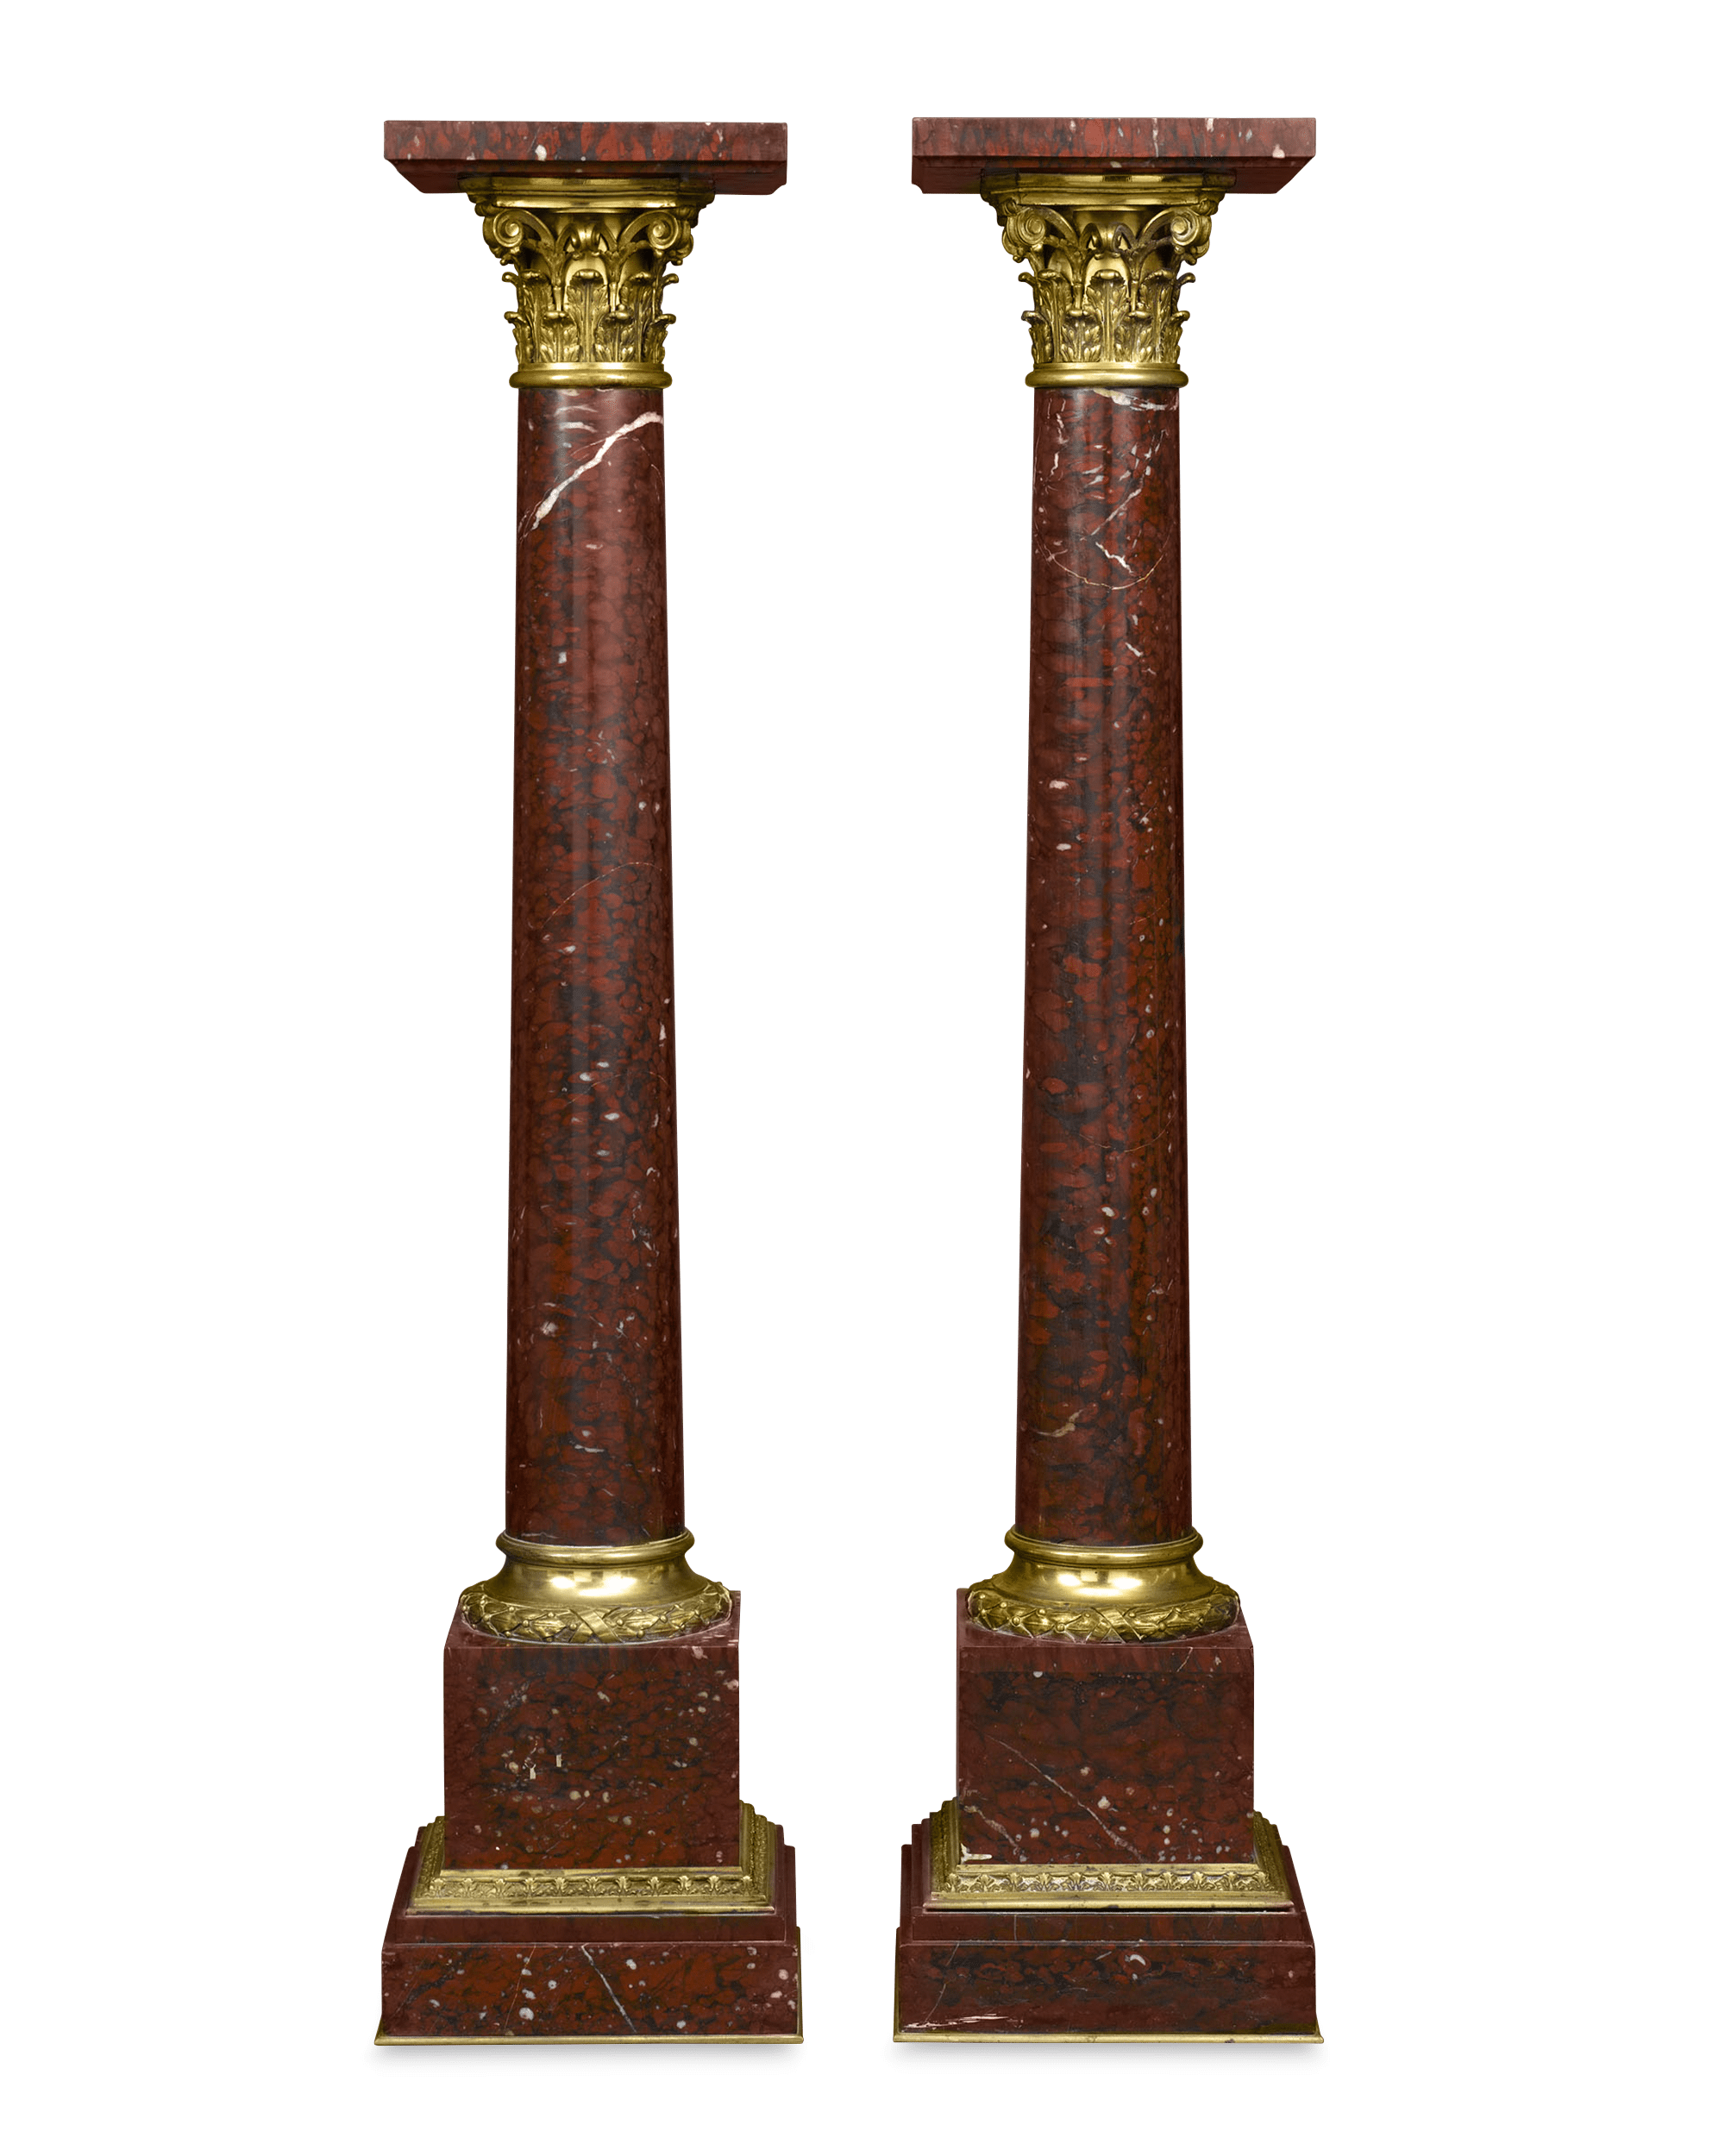 This exceptional pair of rouge marble pedestals make an elegant statement